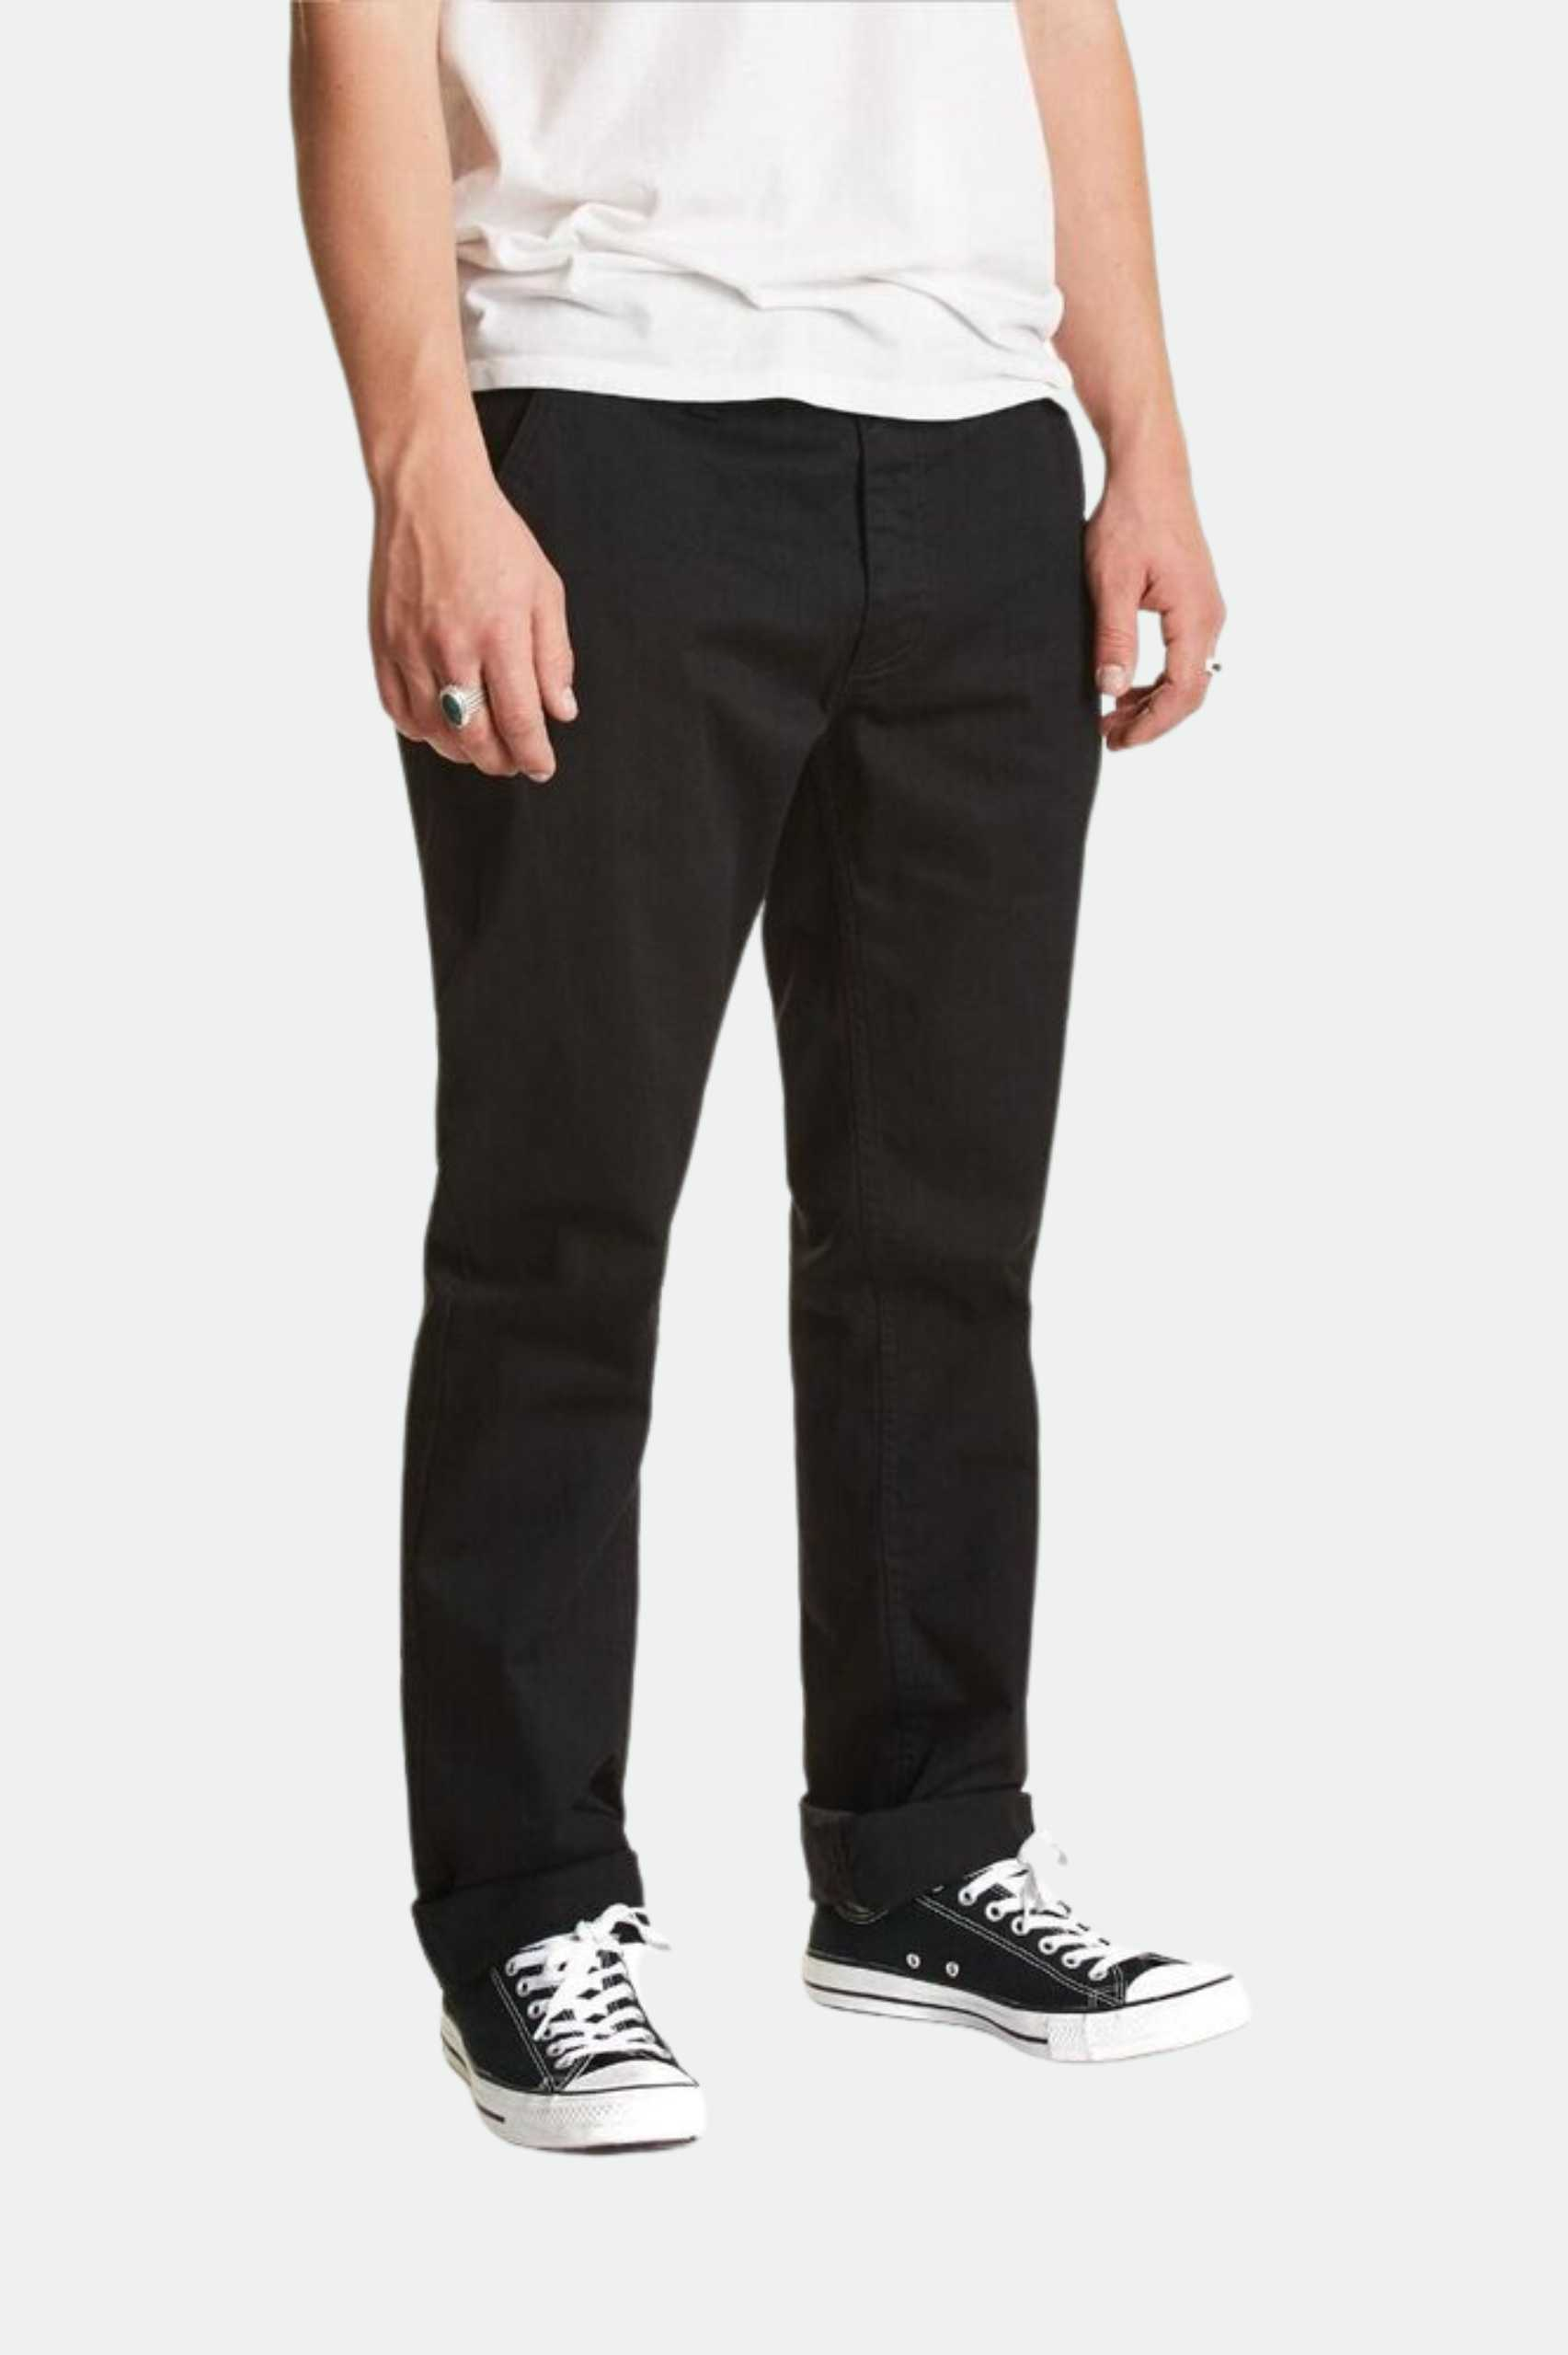 The Brixton Reserve 5-Pocket is a standard-fit pant with a straight leg made in 10-oz. cotton/polyester twill with 1% stretch. It features a button fly, custom Brixton labeling, graded inseam, and a 16 inch leg opening.